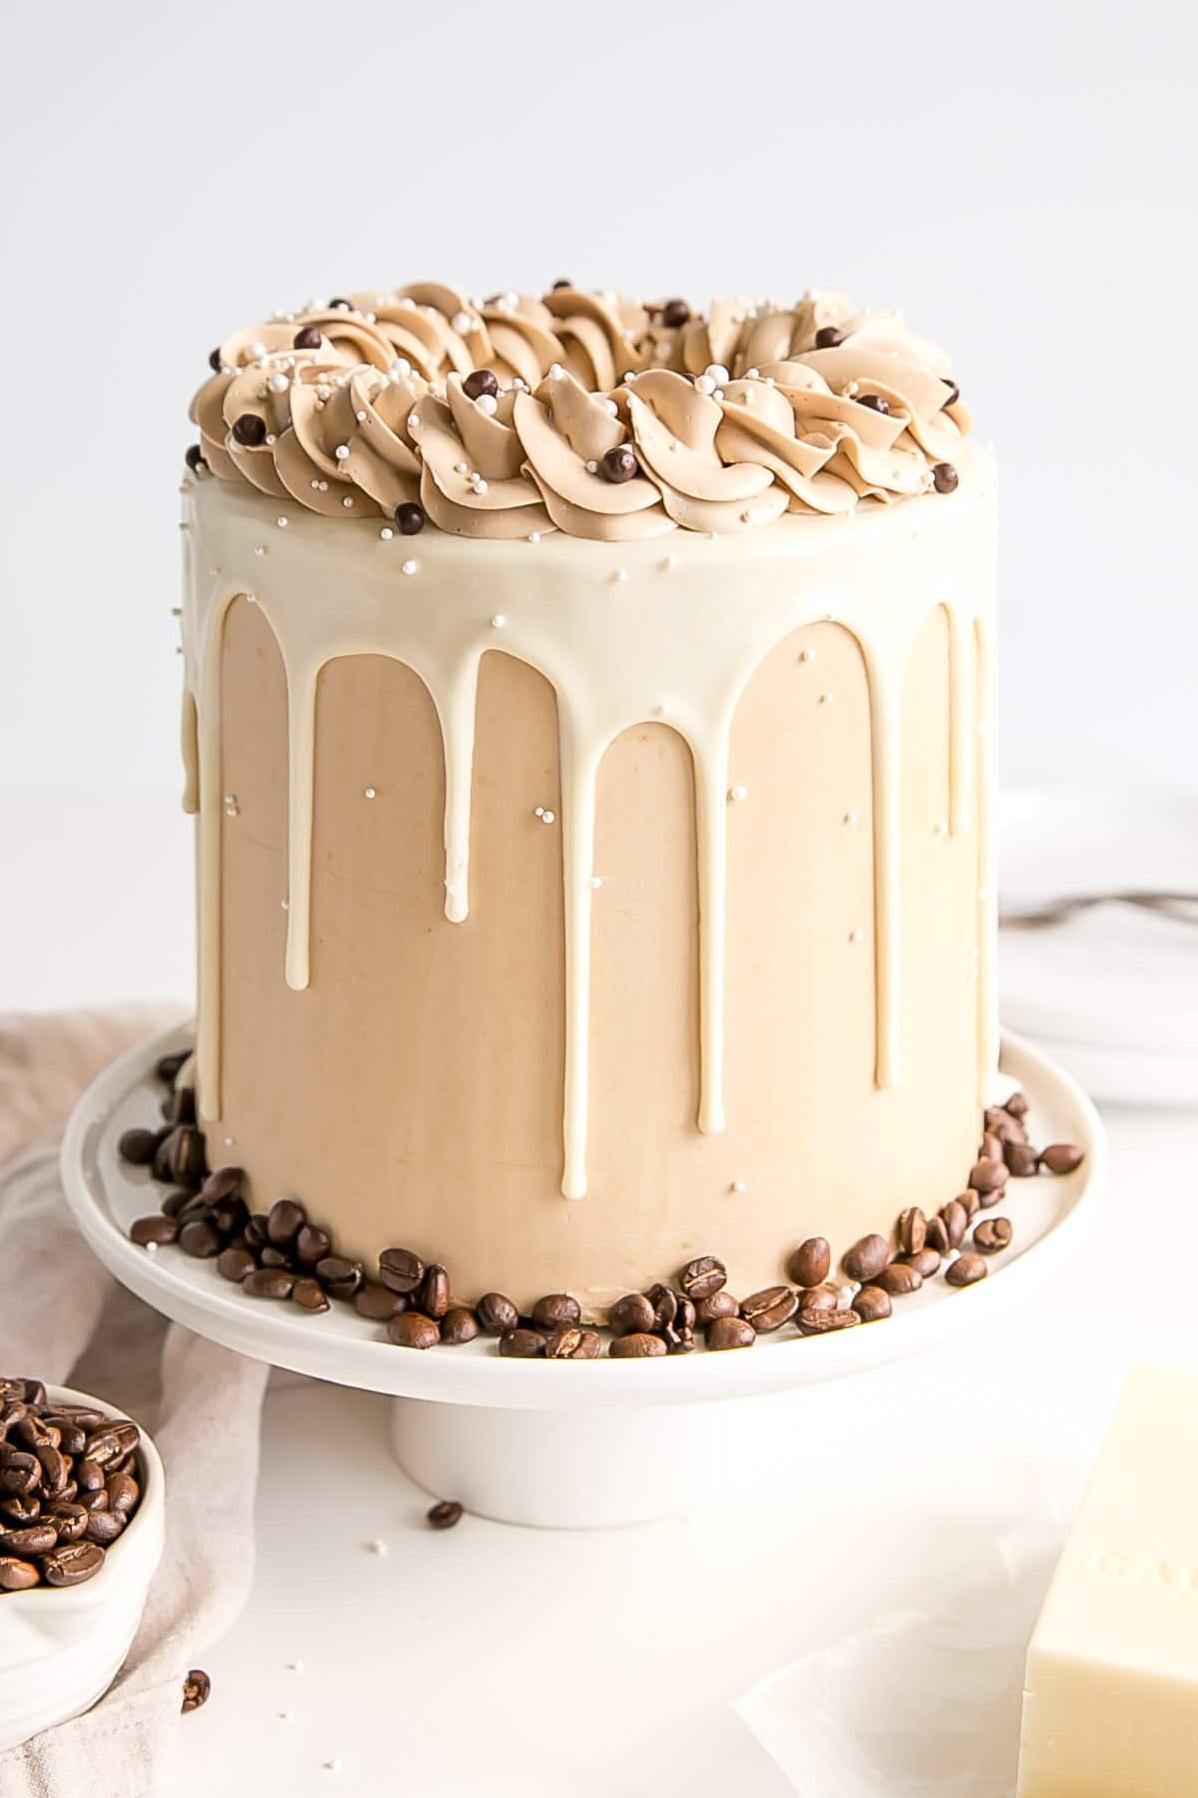  A decadent mocha whipped cream swirl for the ultimate indulgence!